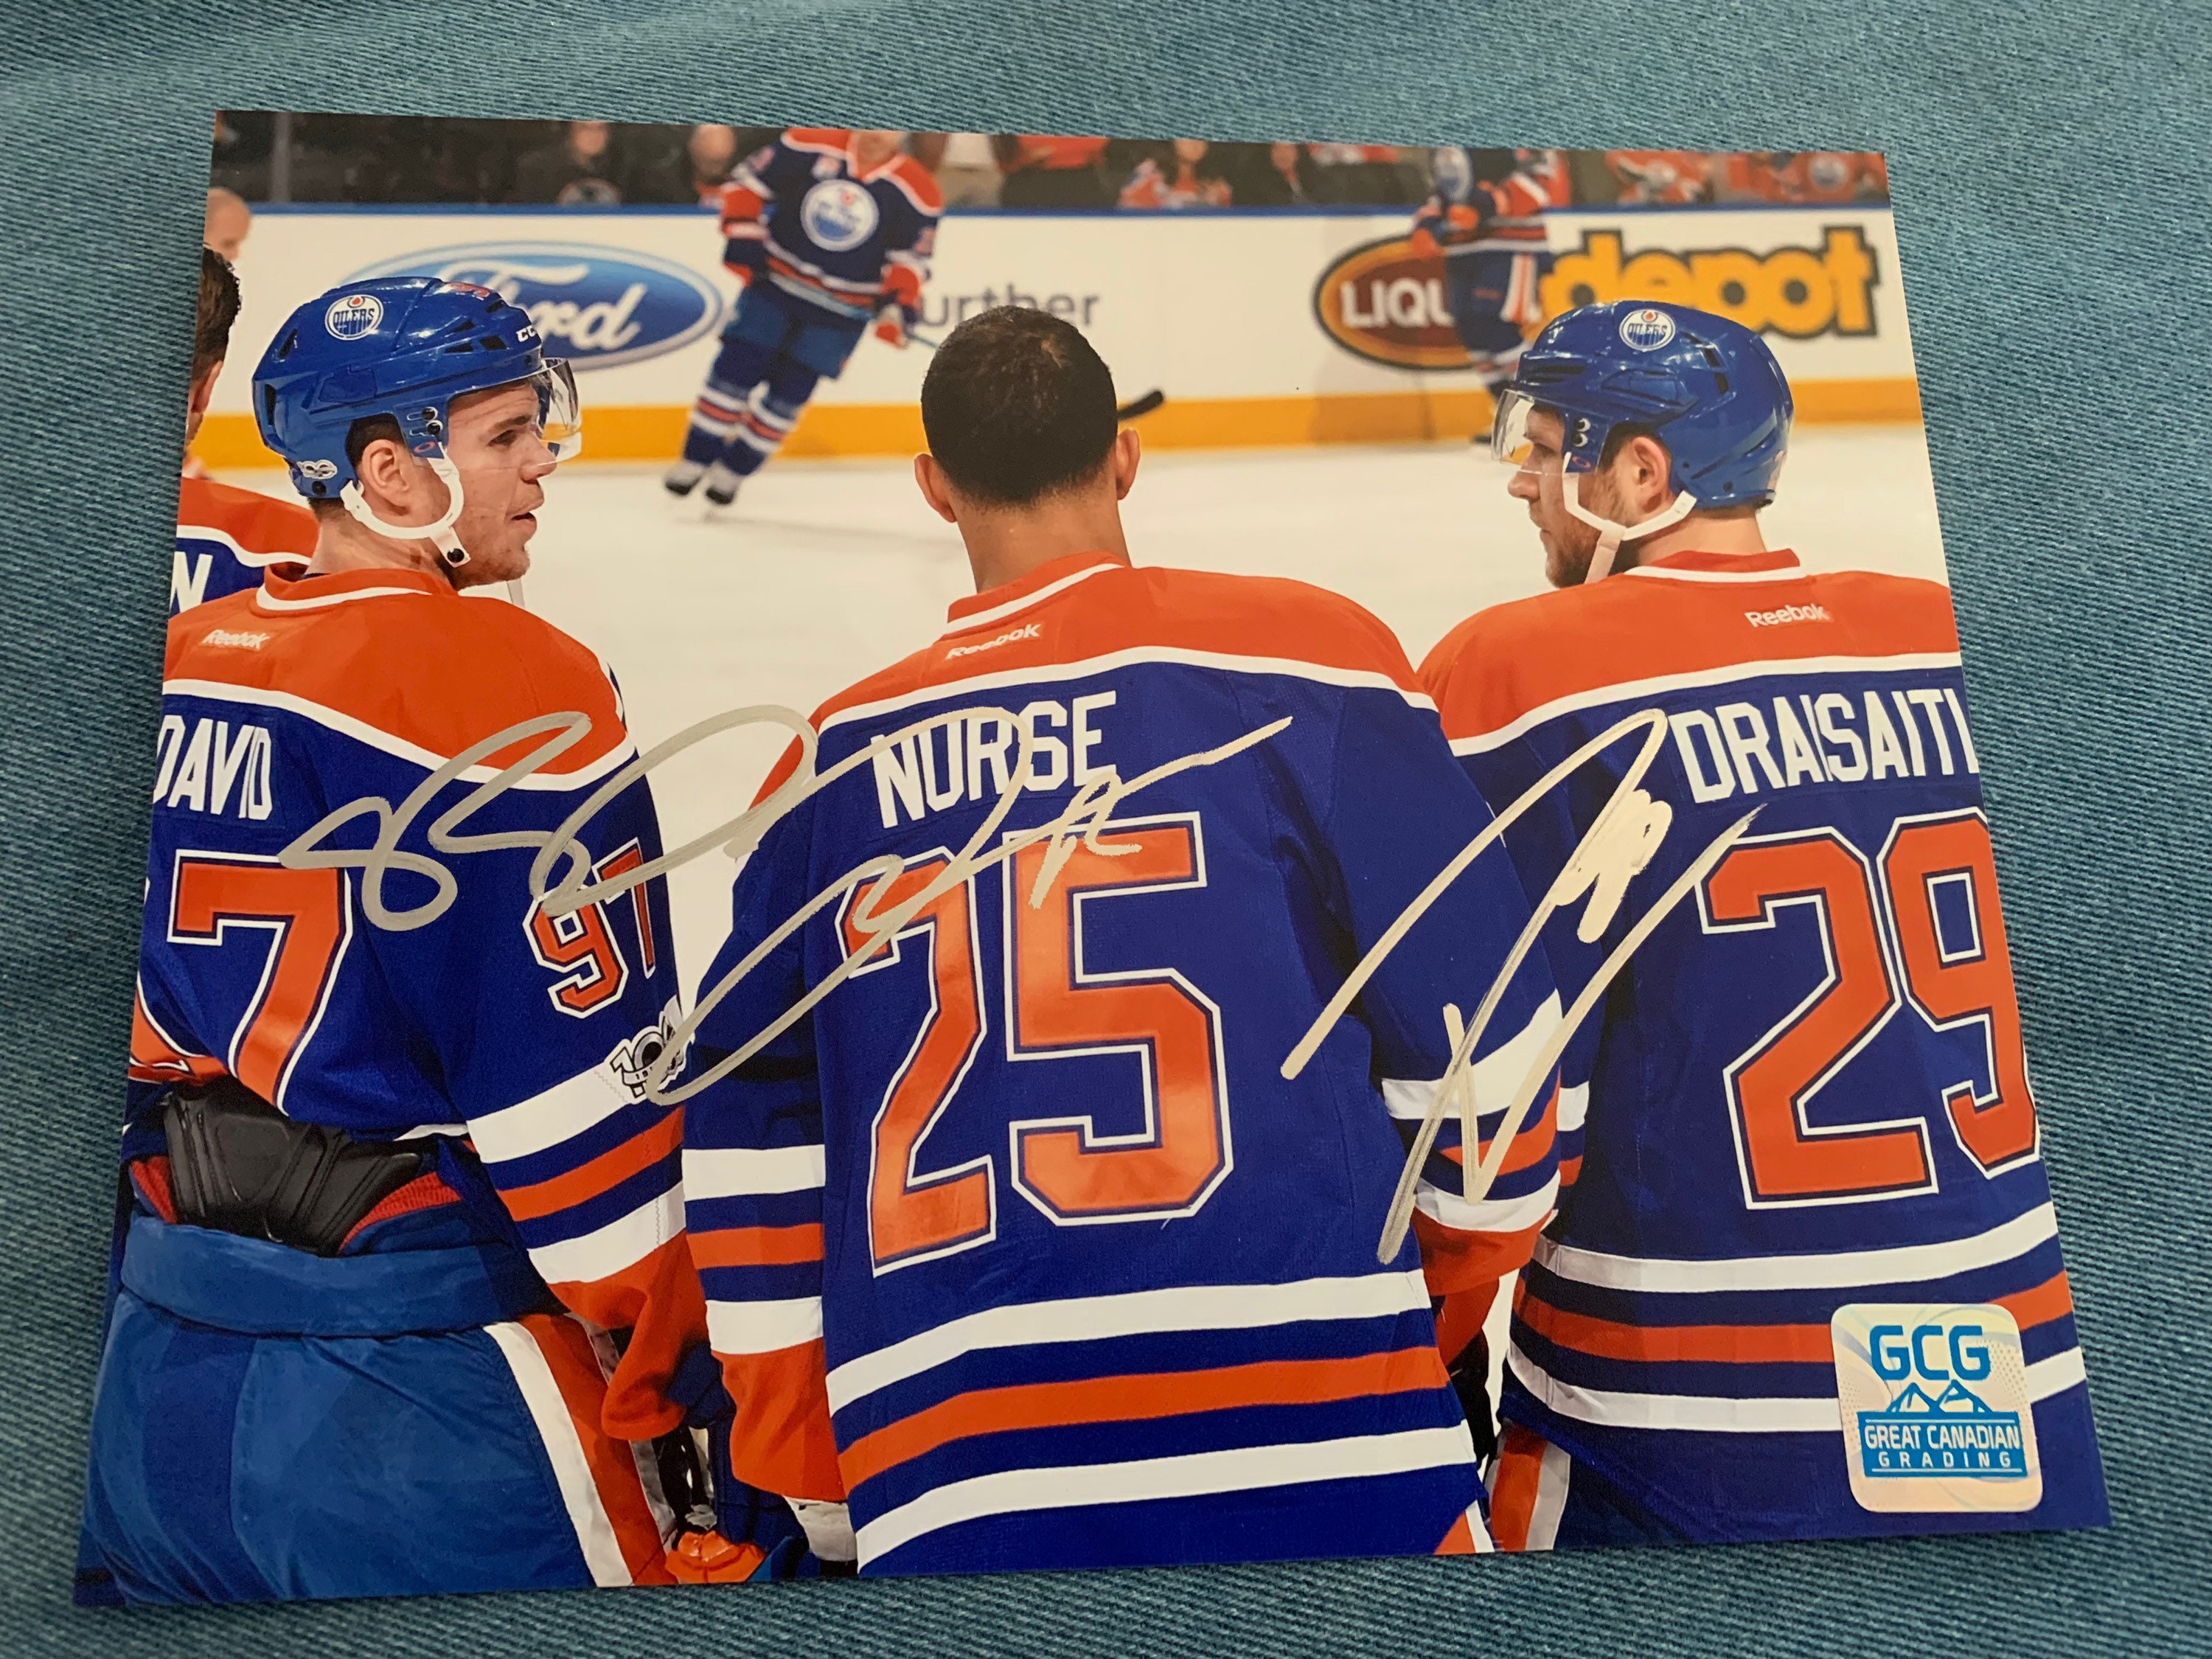 Leon Draisaitl Signed Framed Oilers Home Jersey 11x14 Photo